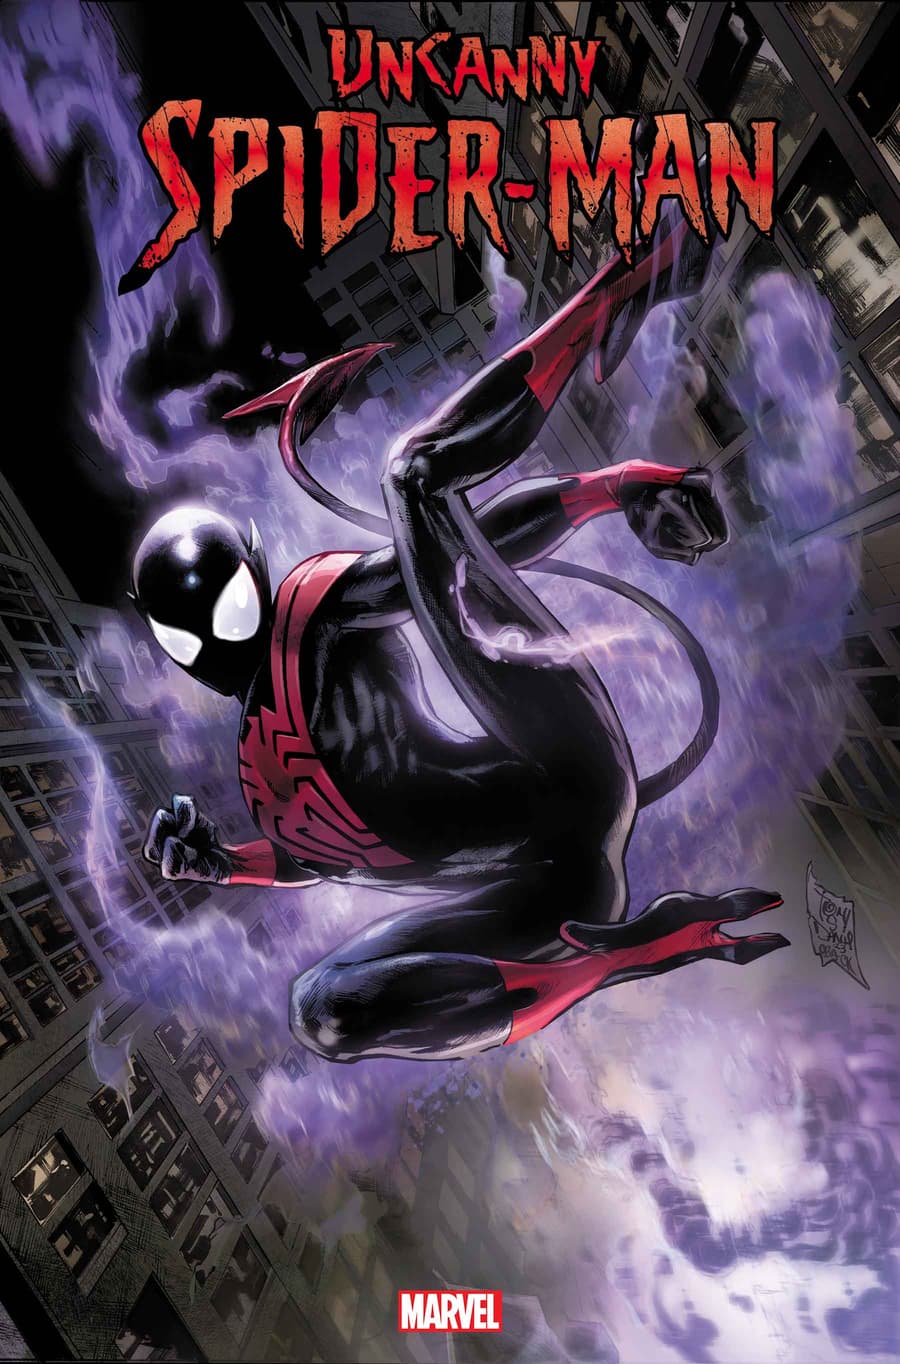 UNCANNY SPIDER-MAN (2023) #1 cover by Tony Daniel